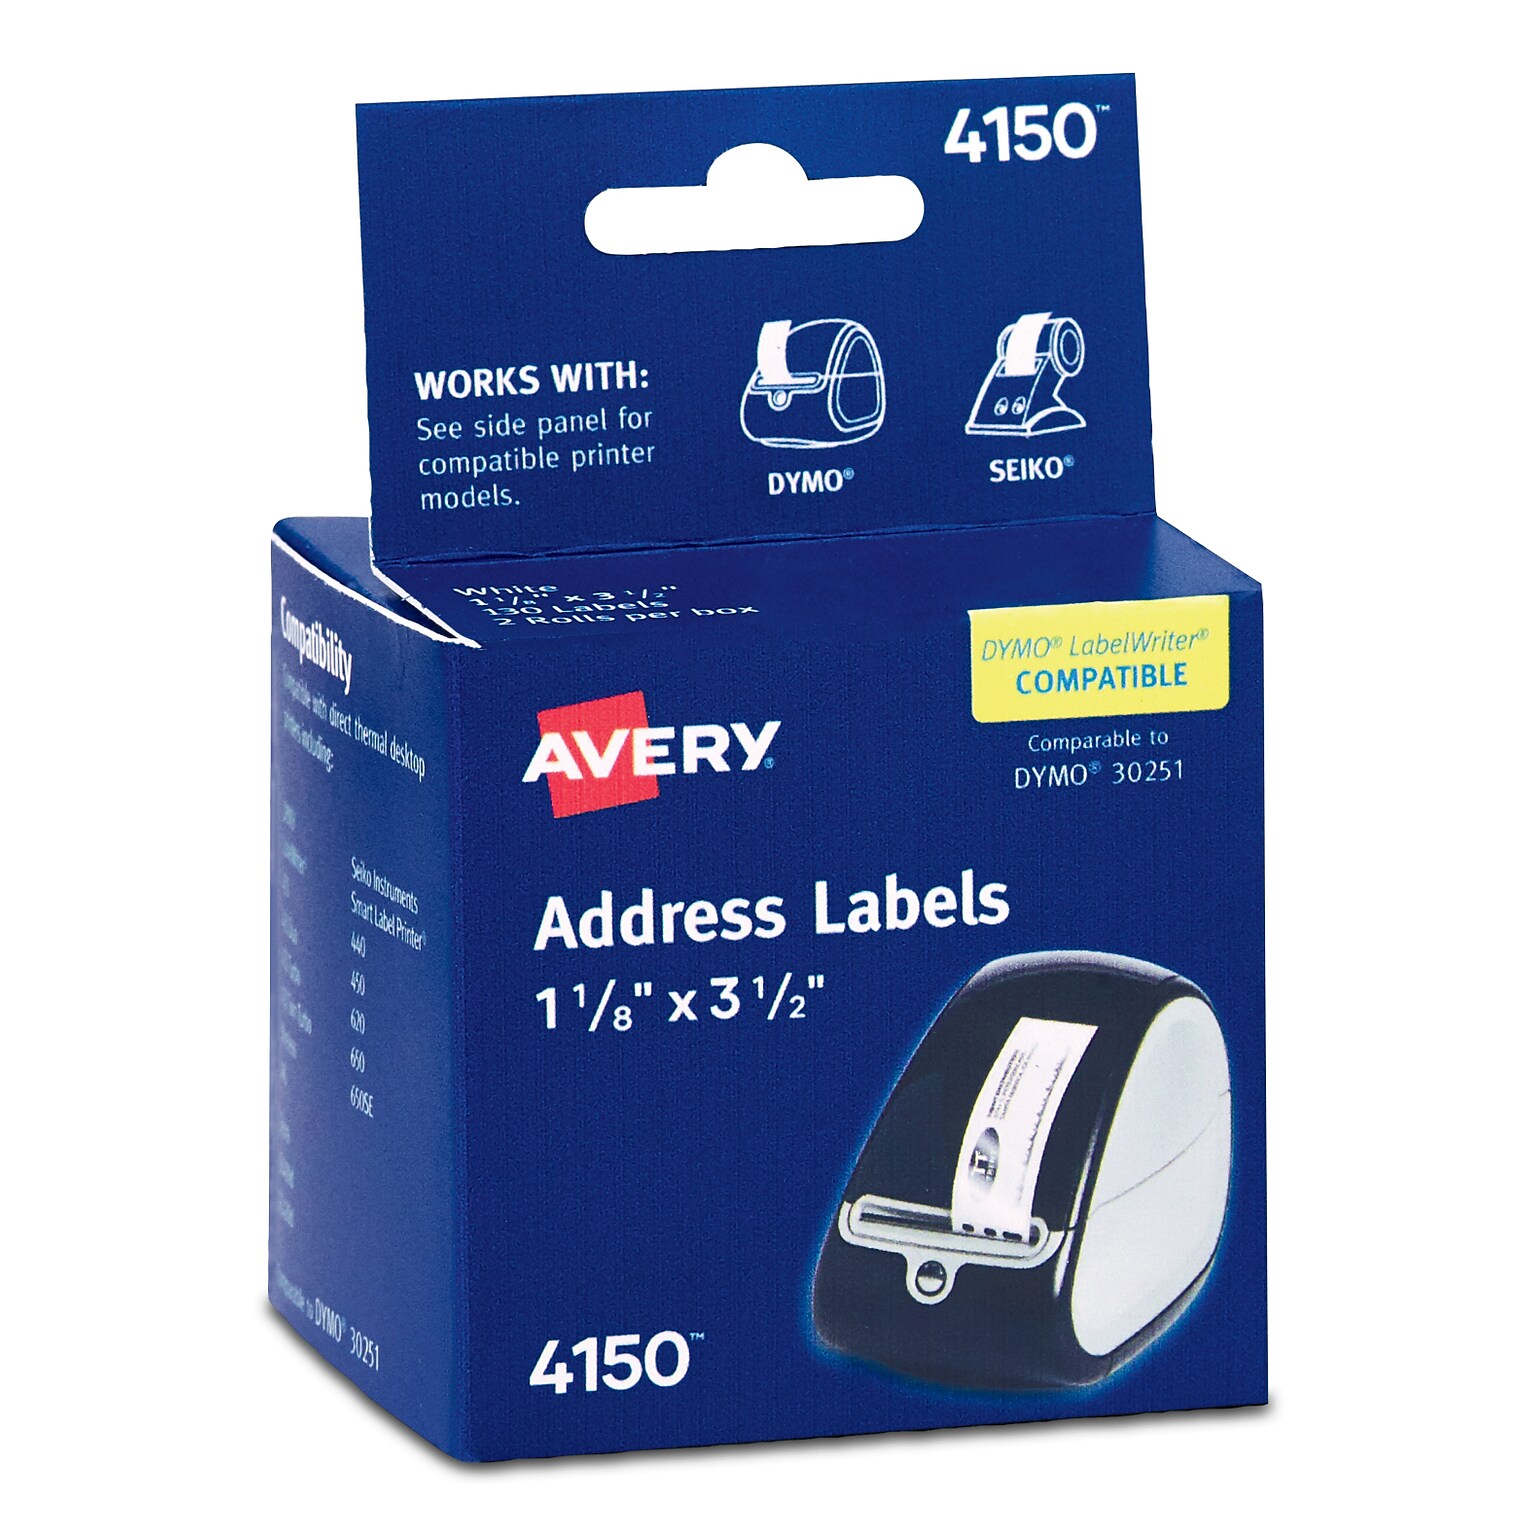 Avery Direct Thermal Roll Address Labels, 1-1/8 x 3-1/2, White, 130 Labels/Roll, 2 Rolls/Box, 260 Labels/Box (4150)